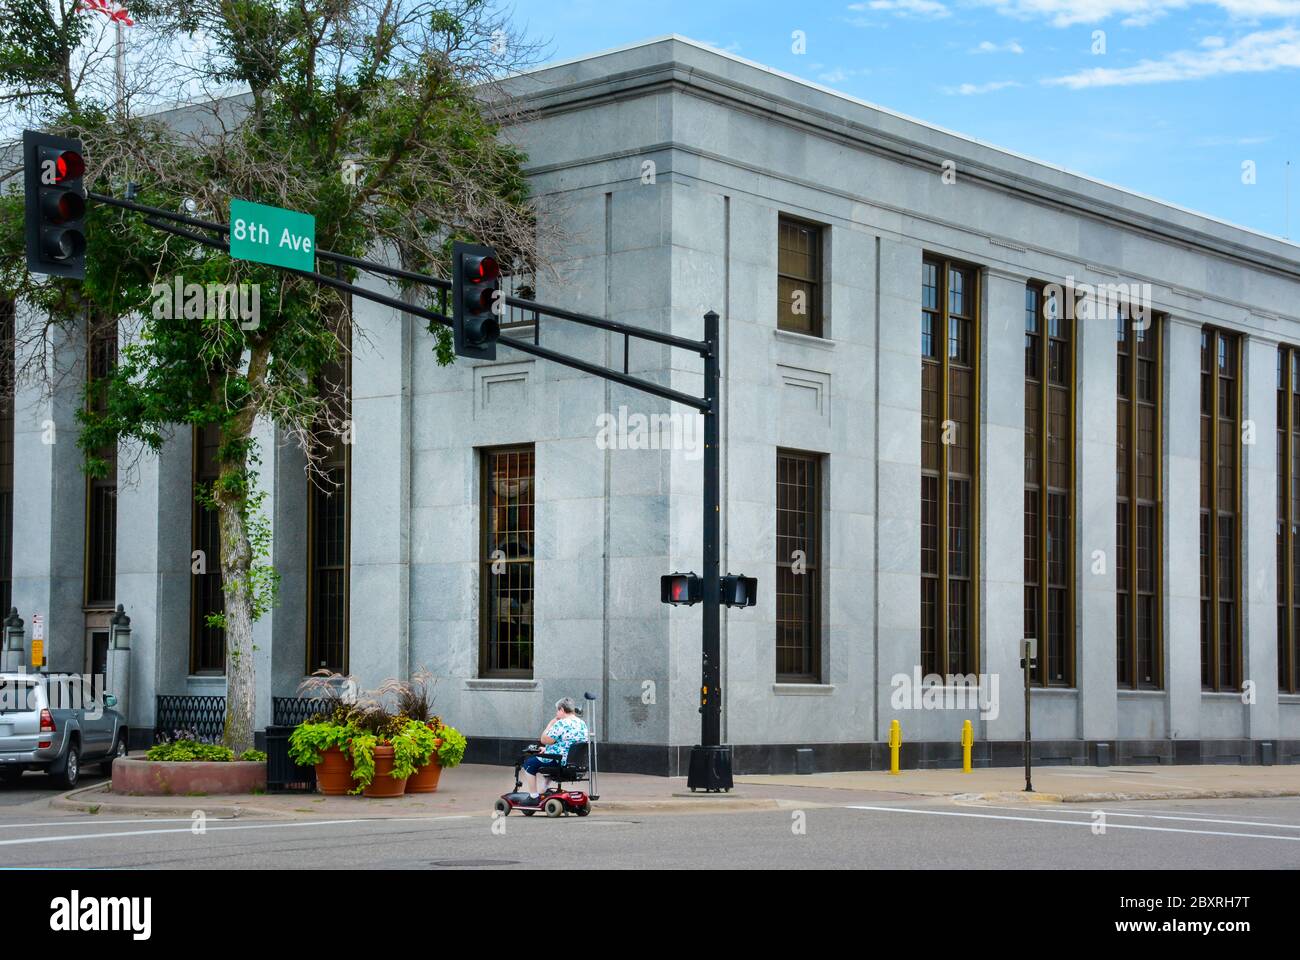 A senior citizen in a mobility scooter crosses 8th Avenue in front of the historic, former USPO building in downtown St. Cloud, MN, USA Stock Photo